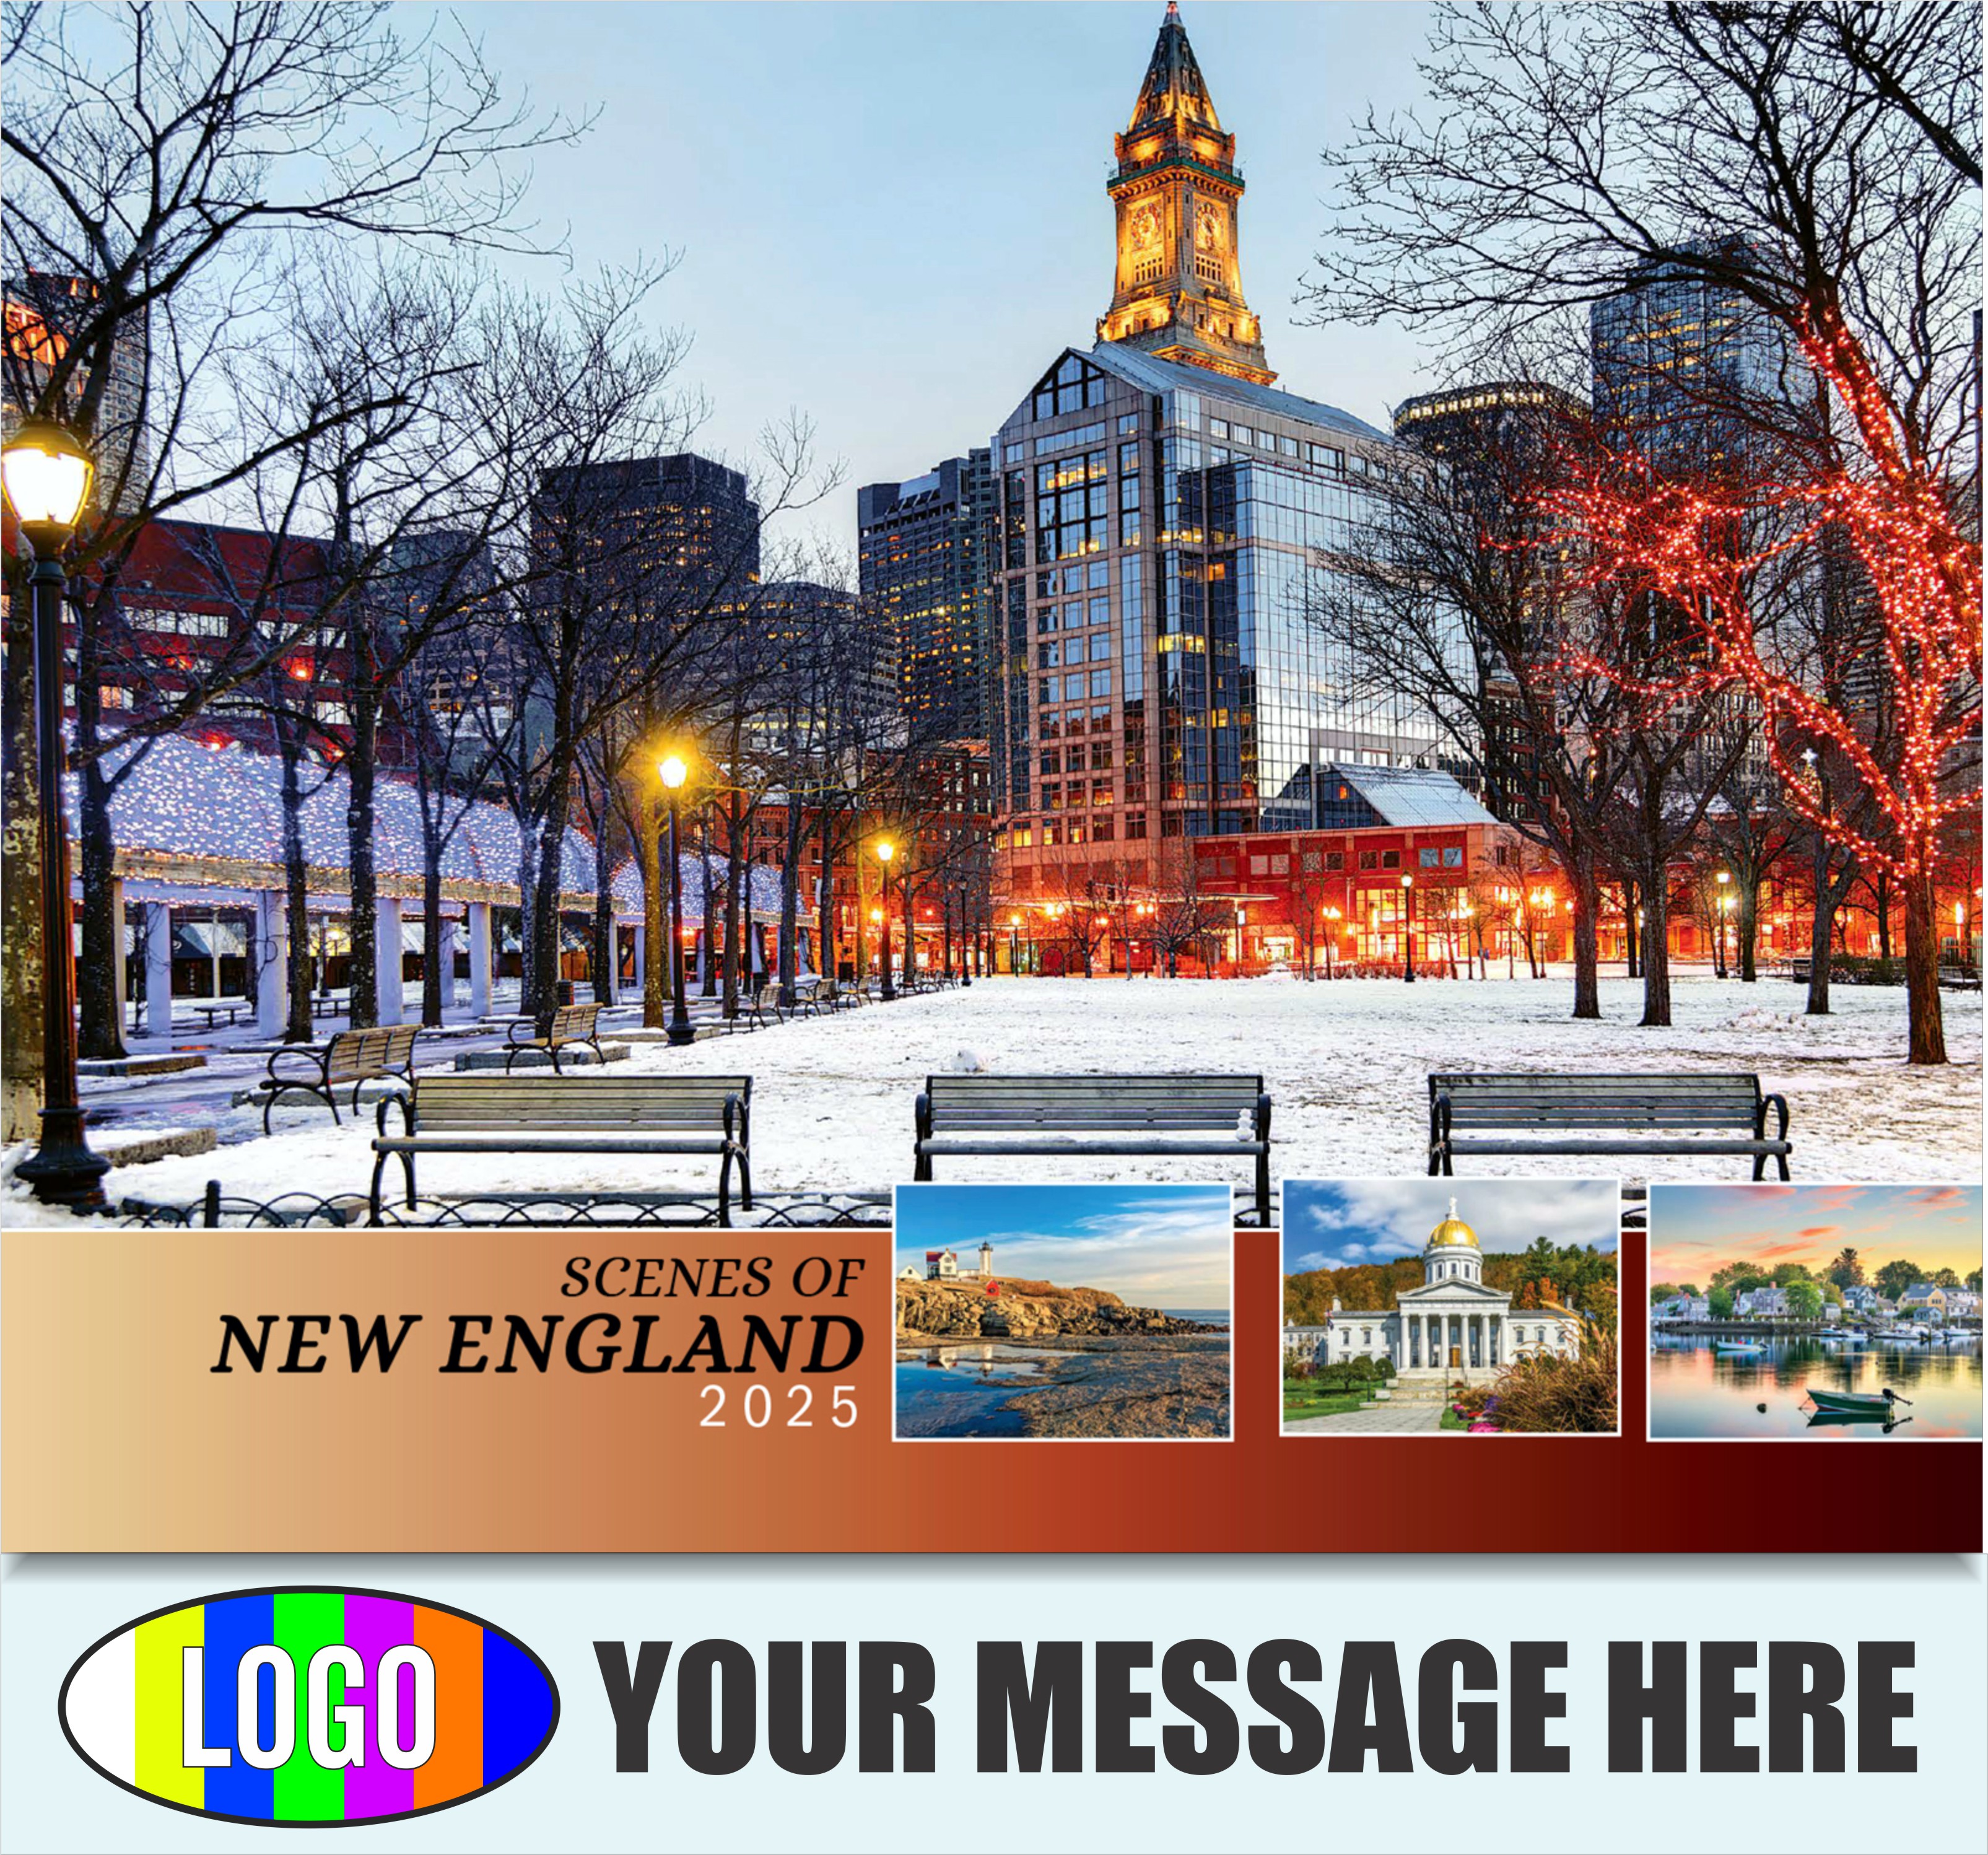 Scenes of New England 2025 Business Advertising Wall Calendar - cover